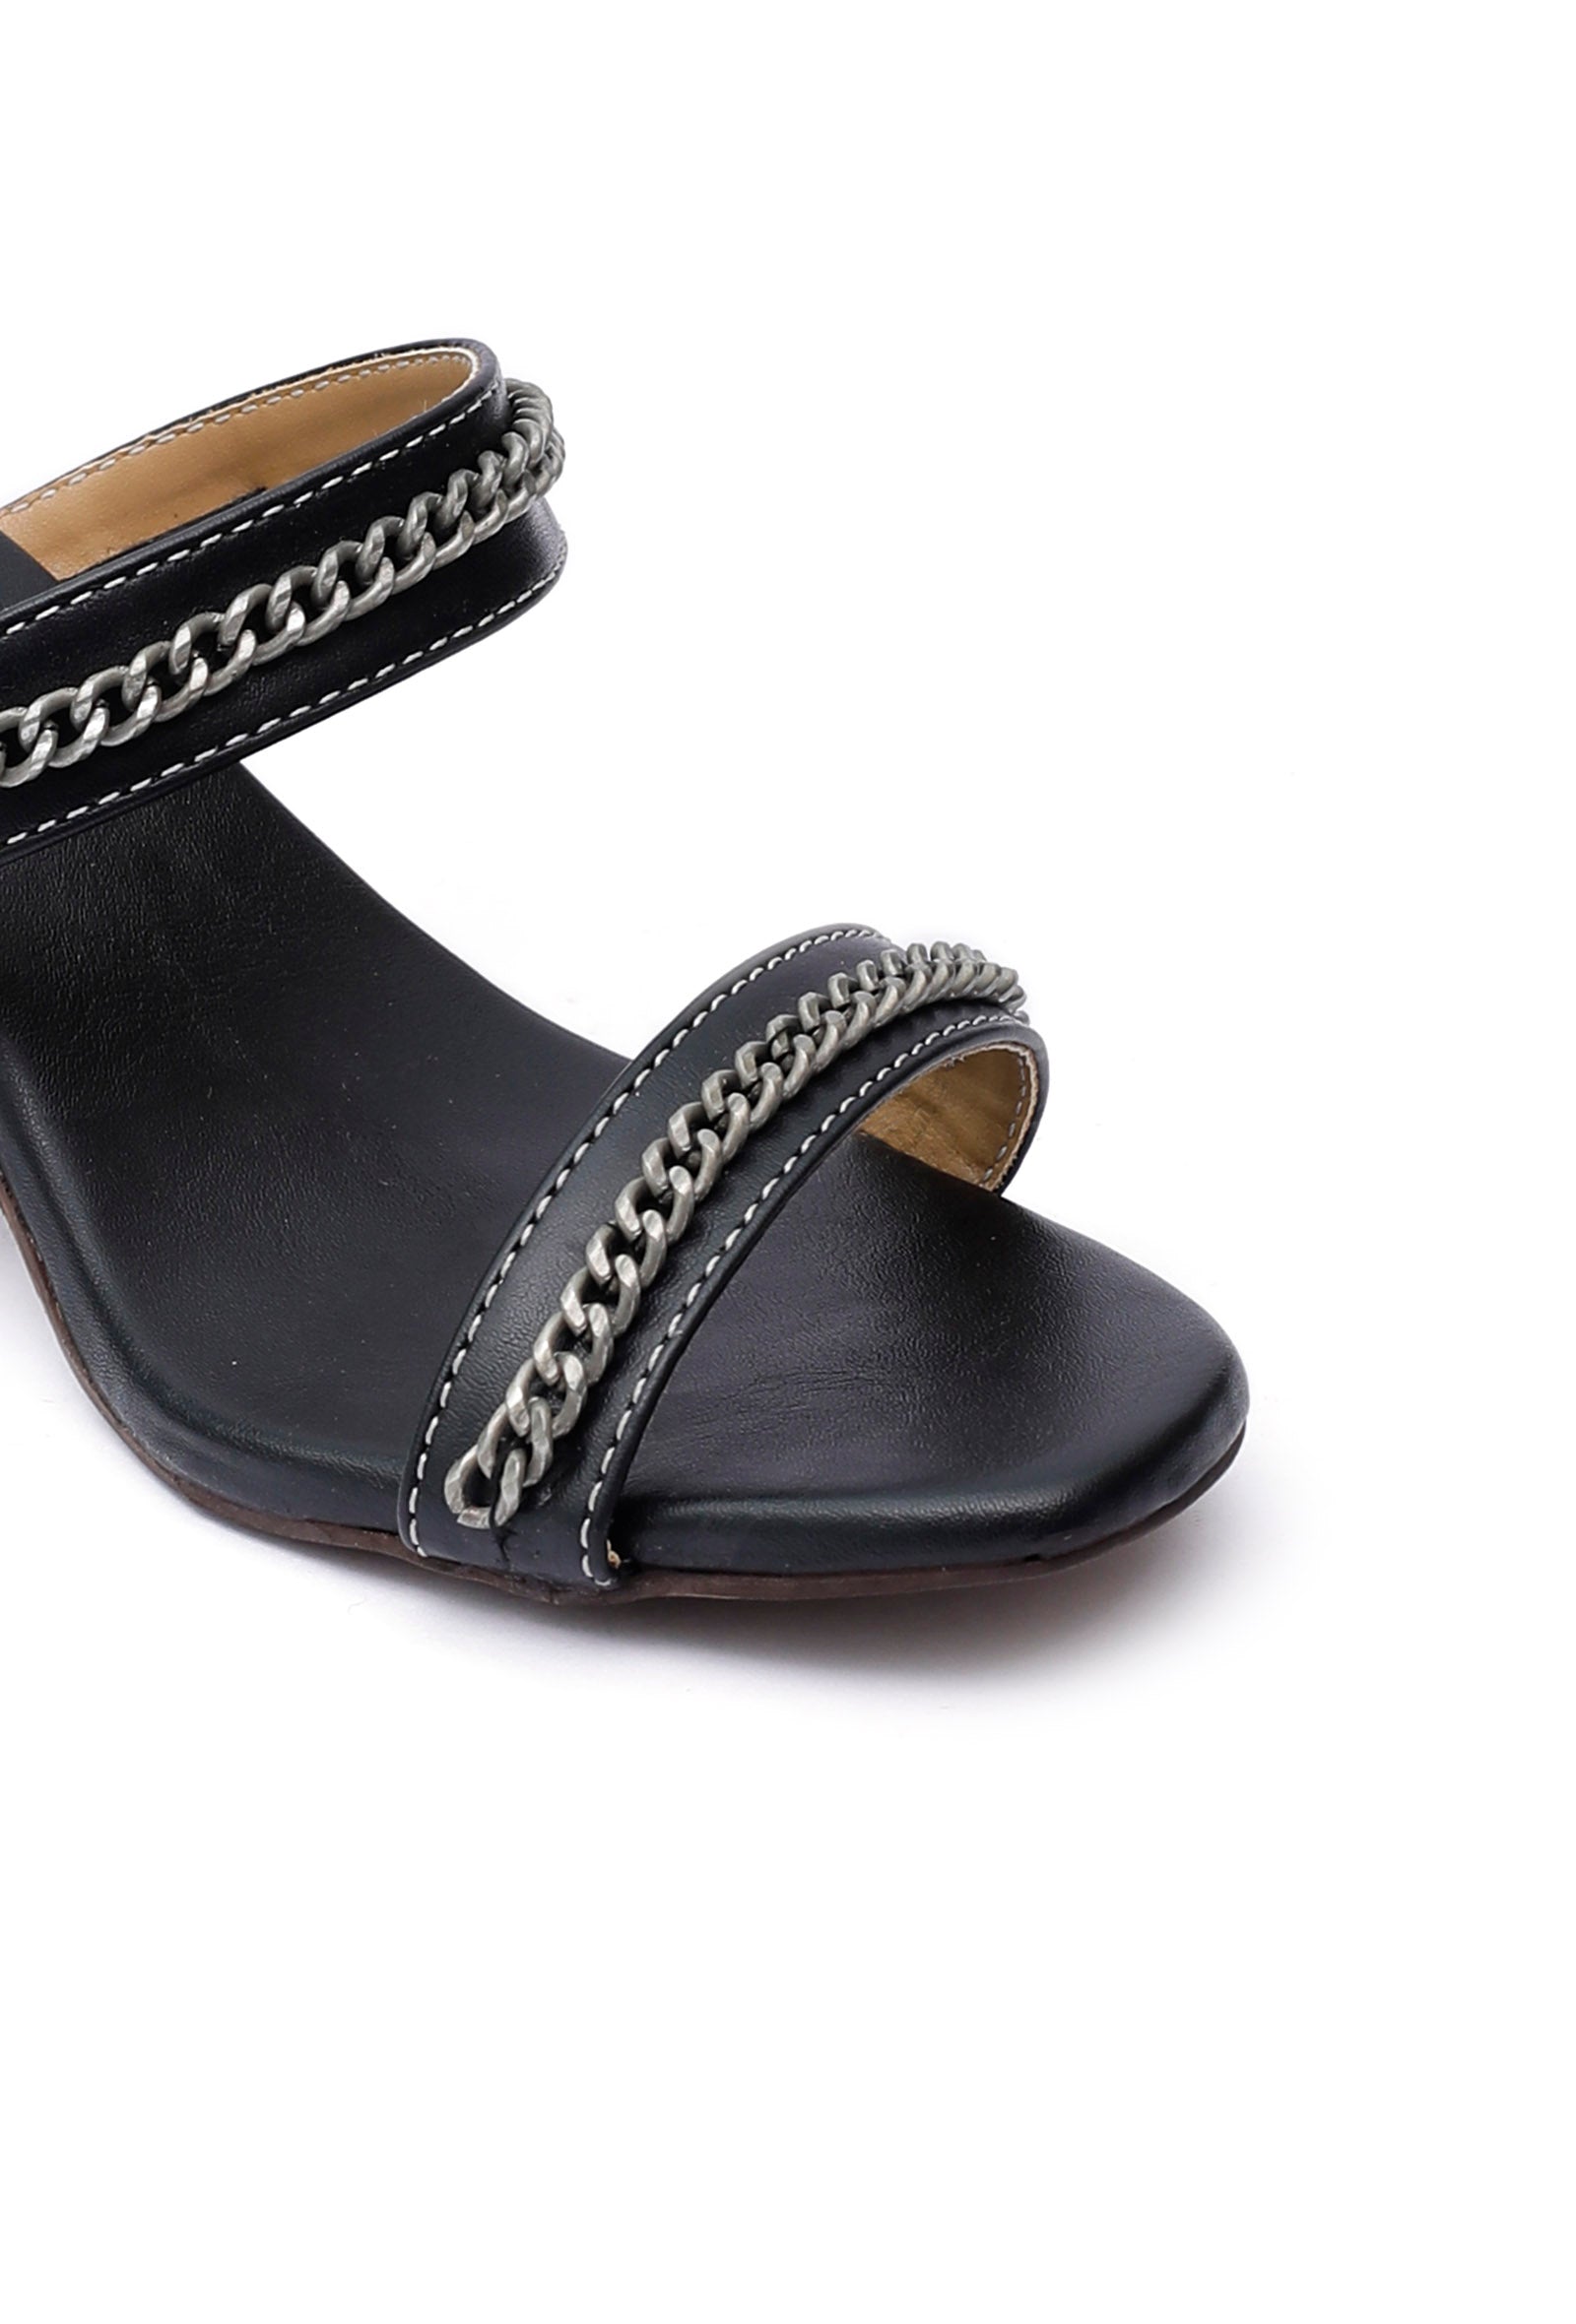 Charcoal Black Chain Cruelty-Free Leather Stealtoes